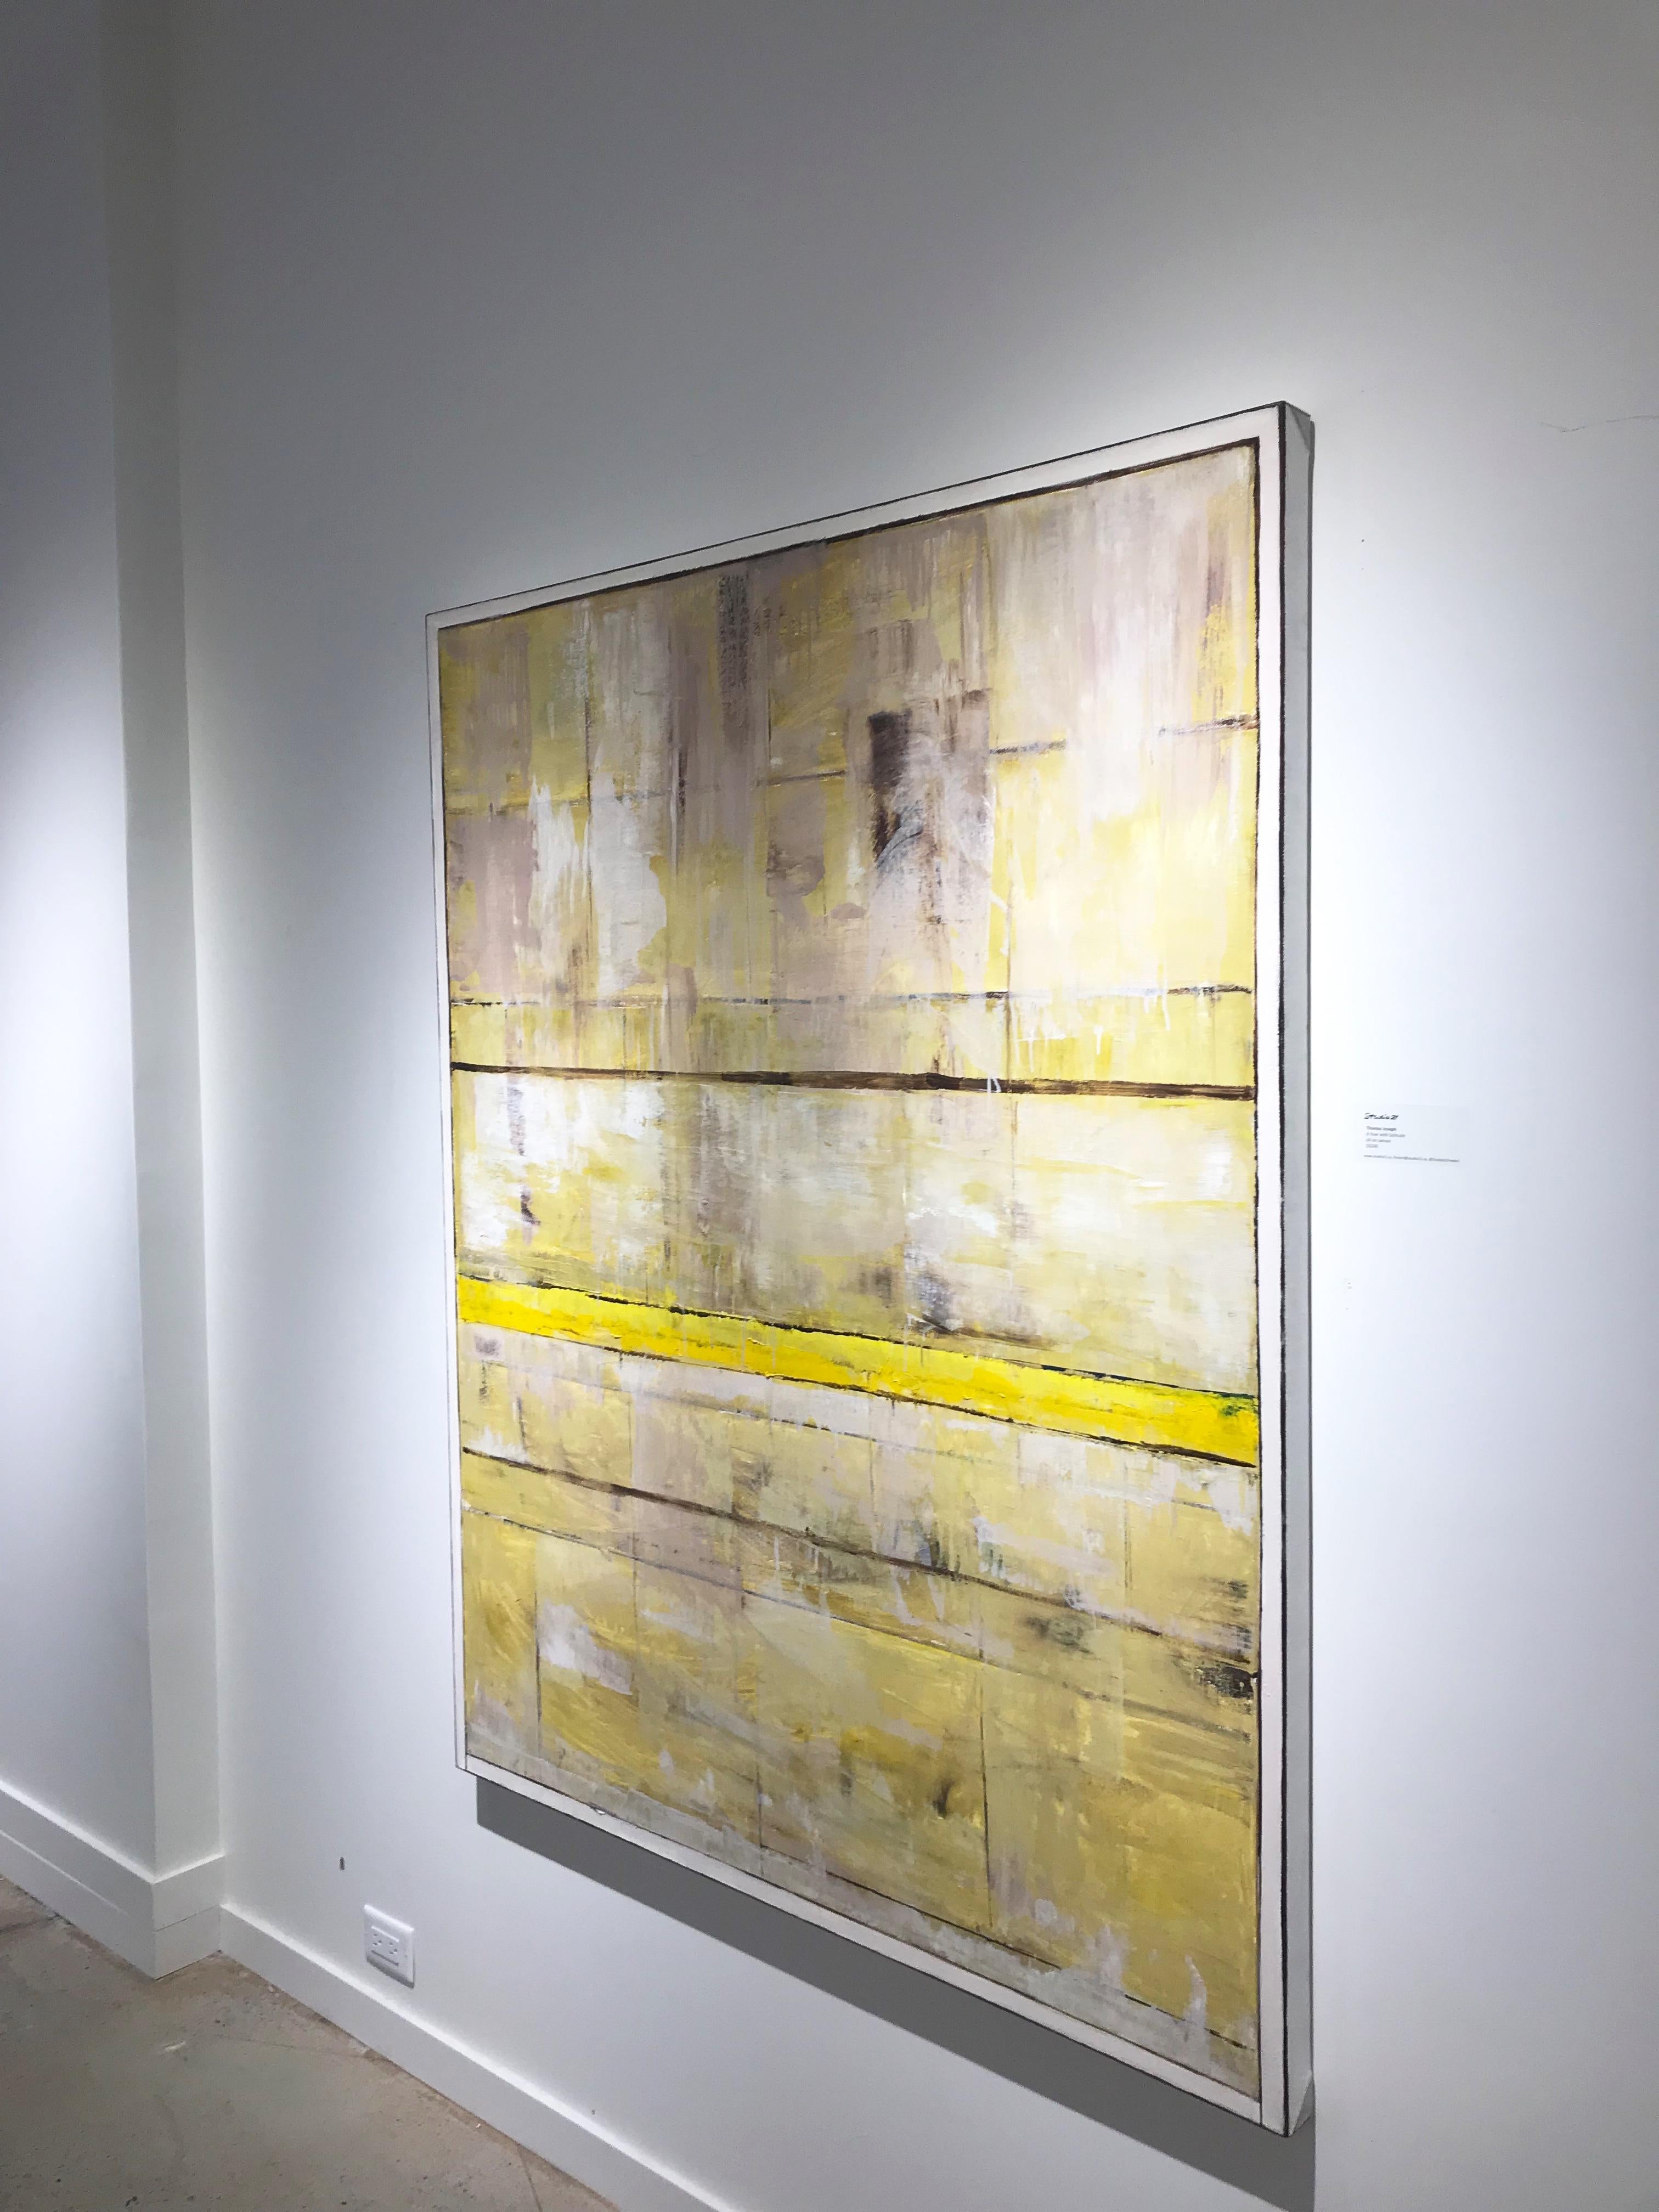 Horizon Passage: Yellow, White, Umber, abstract oil painting on canvas - Painting by David Sorensen